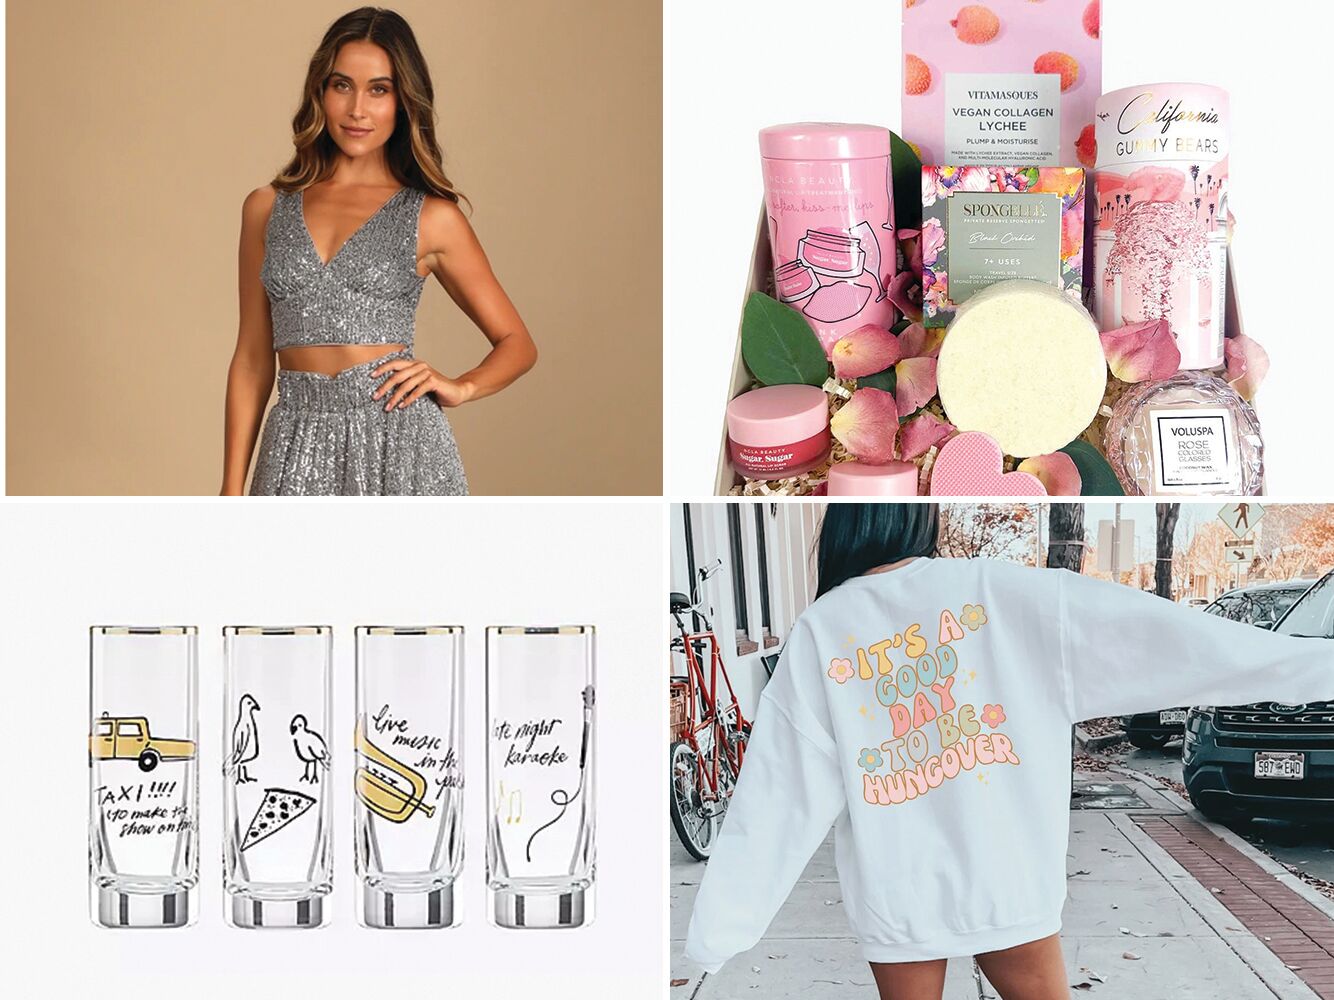 Spoil Your Girlfriend With These 21st Birthday Gifts